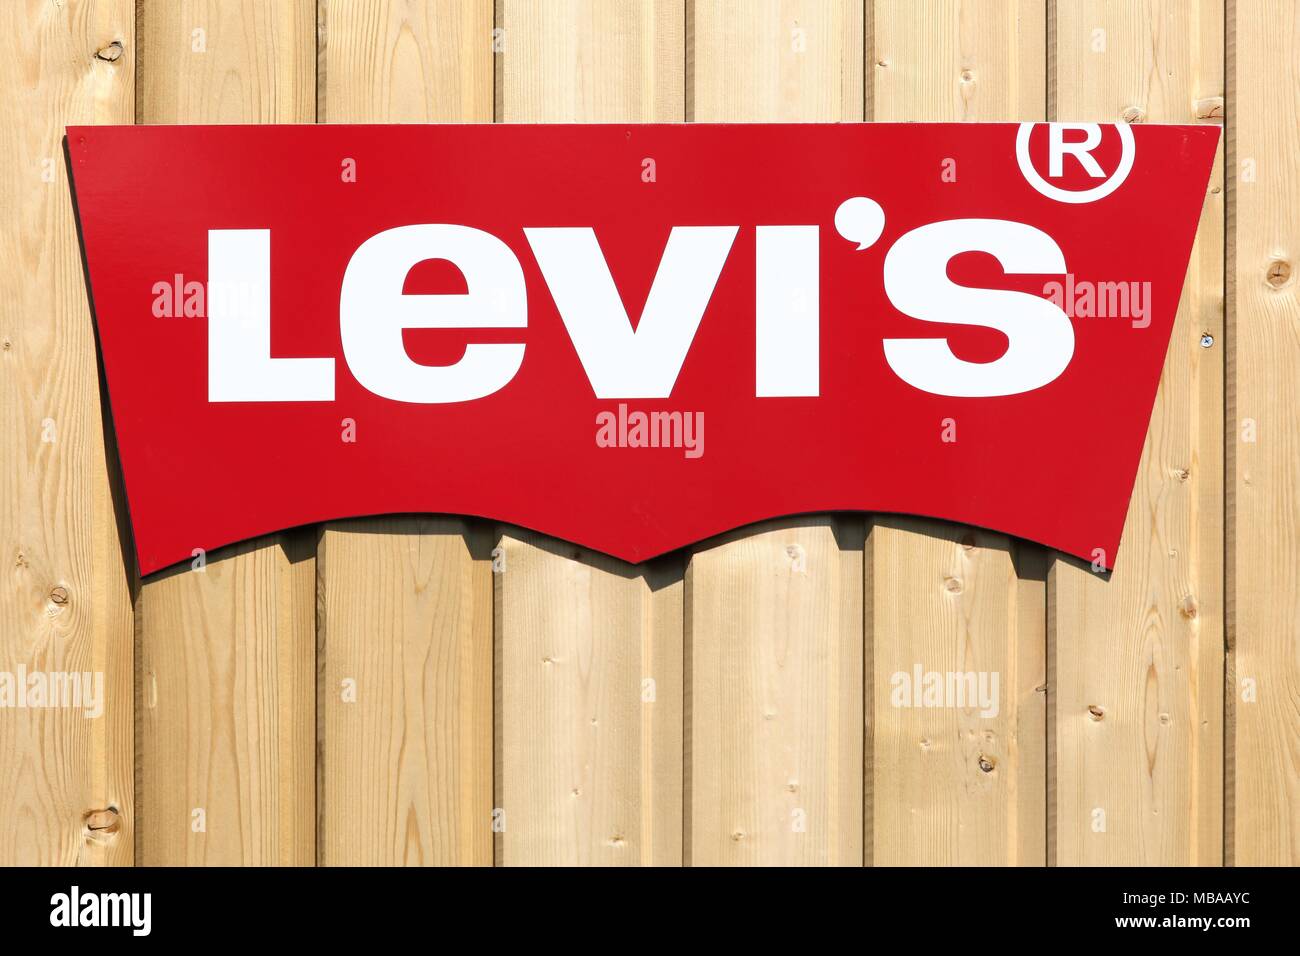 Villefranche, France - June 11, 2017: Levi Strauss logo on a wall. Levi Strauss founded in 1853, is a privately held American clothing company Stock Photo